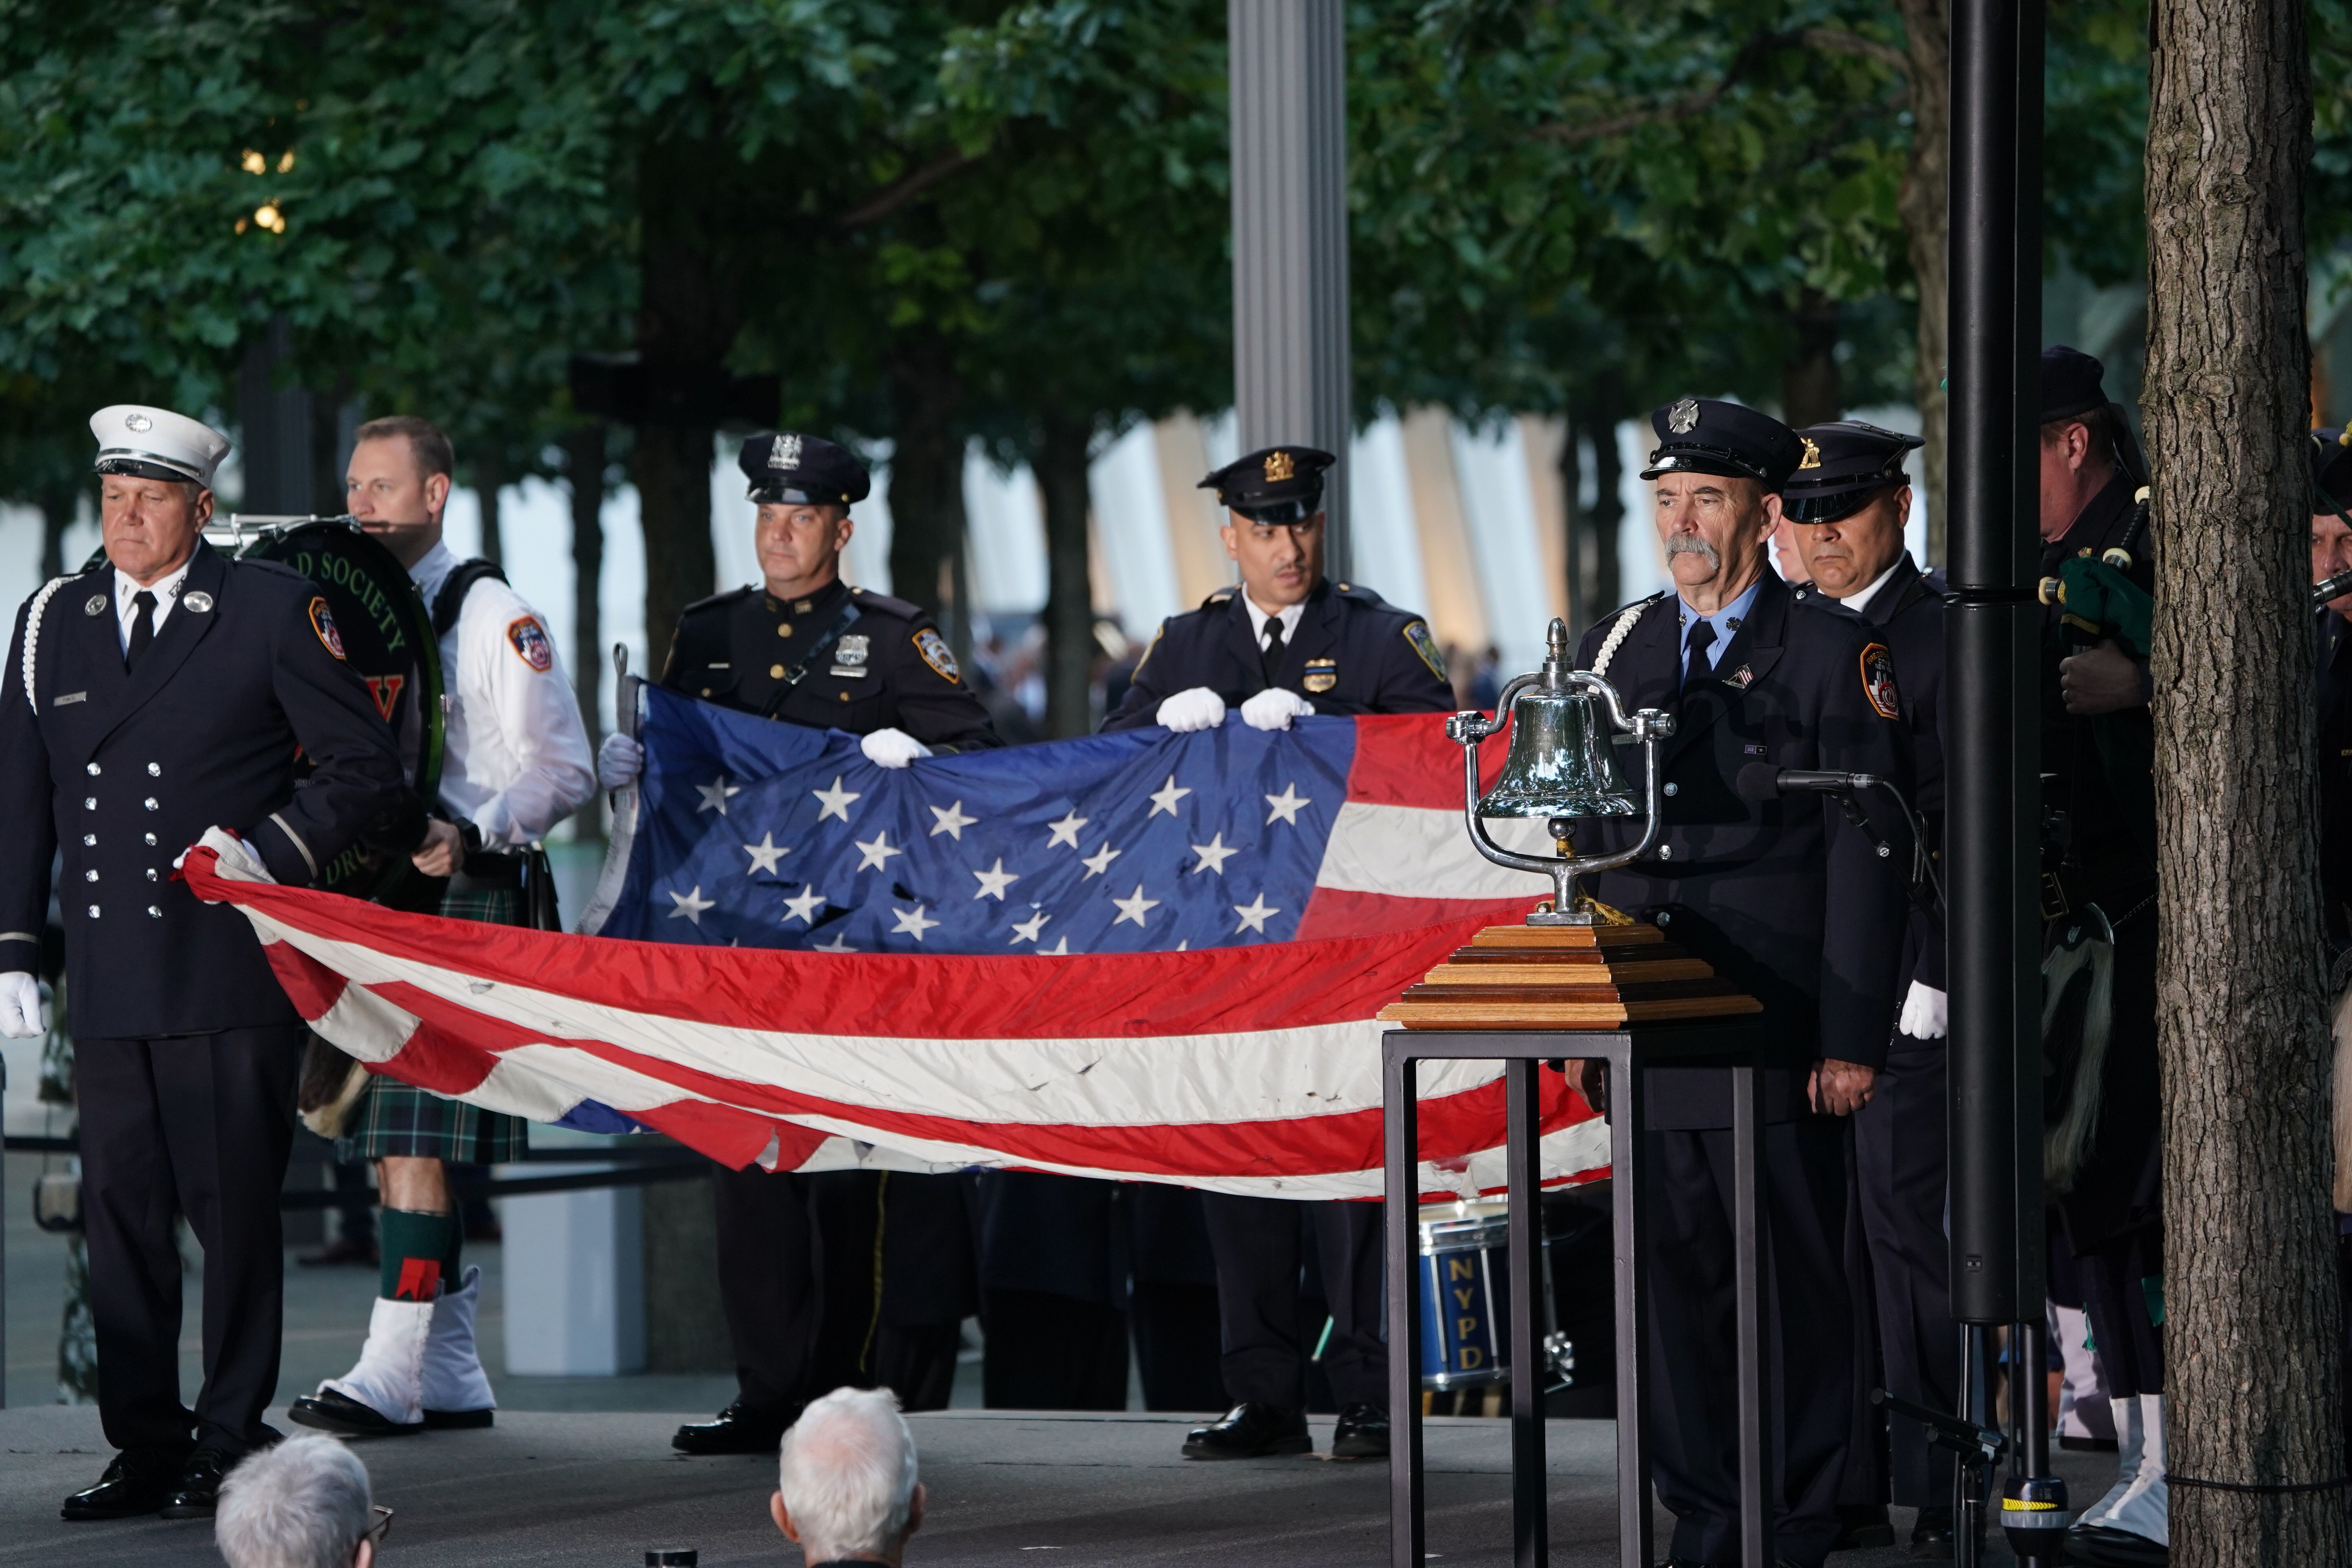 Flag bearers take part in the September 11 Commemoration Ceremony at the 9/11 Memorial at the World Trade Center